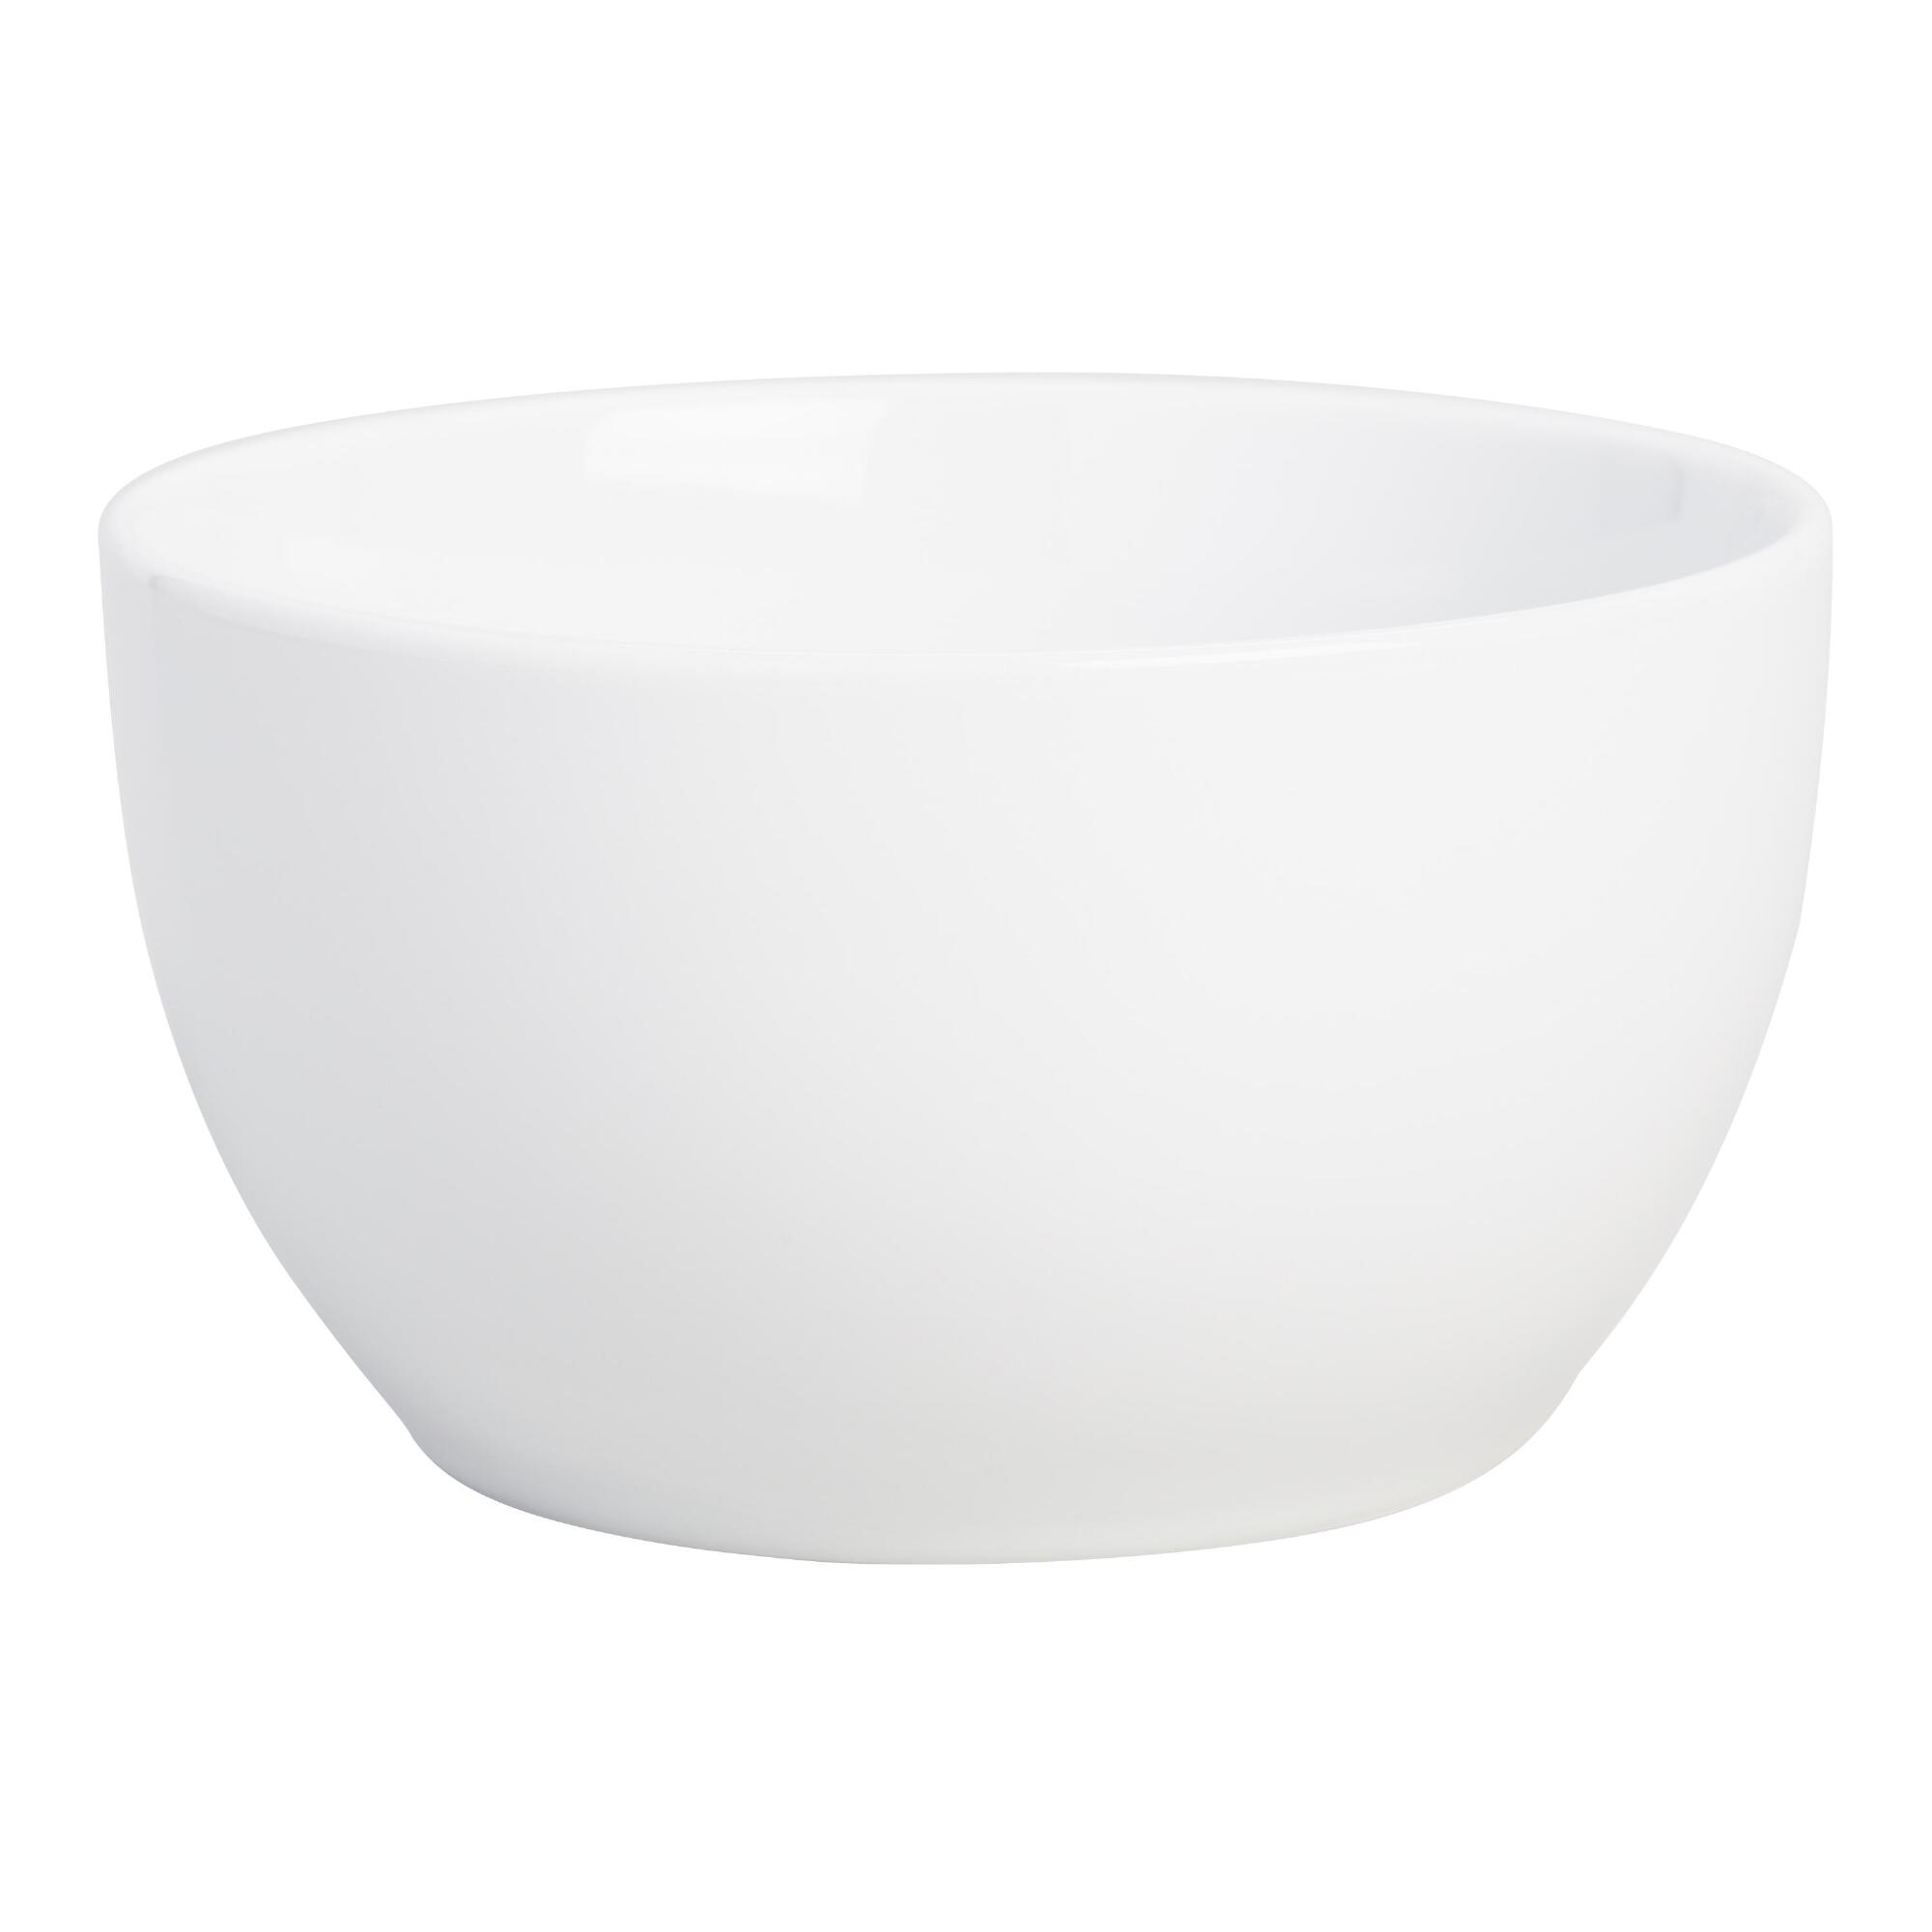 White Porcelain Coupe Cereal Bowls Set Of 4 by World Market